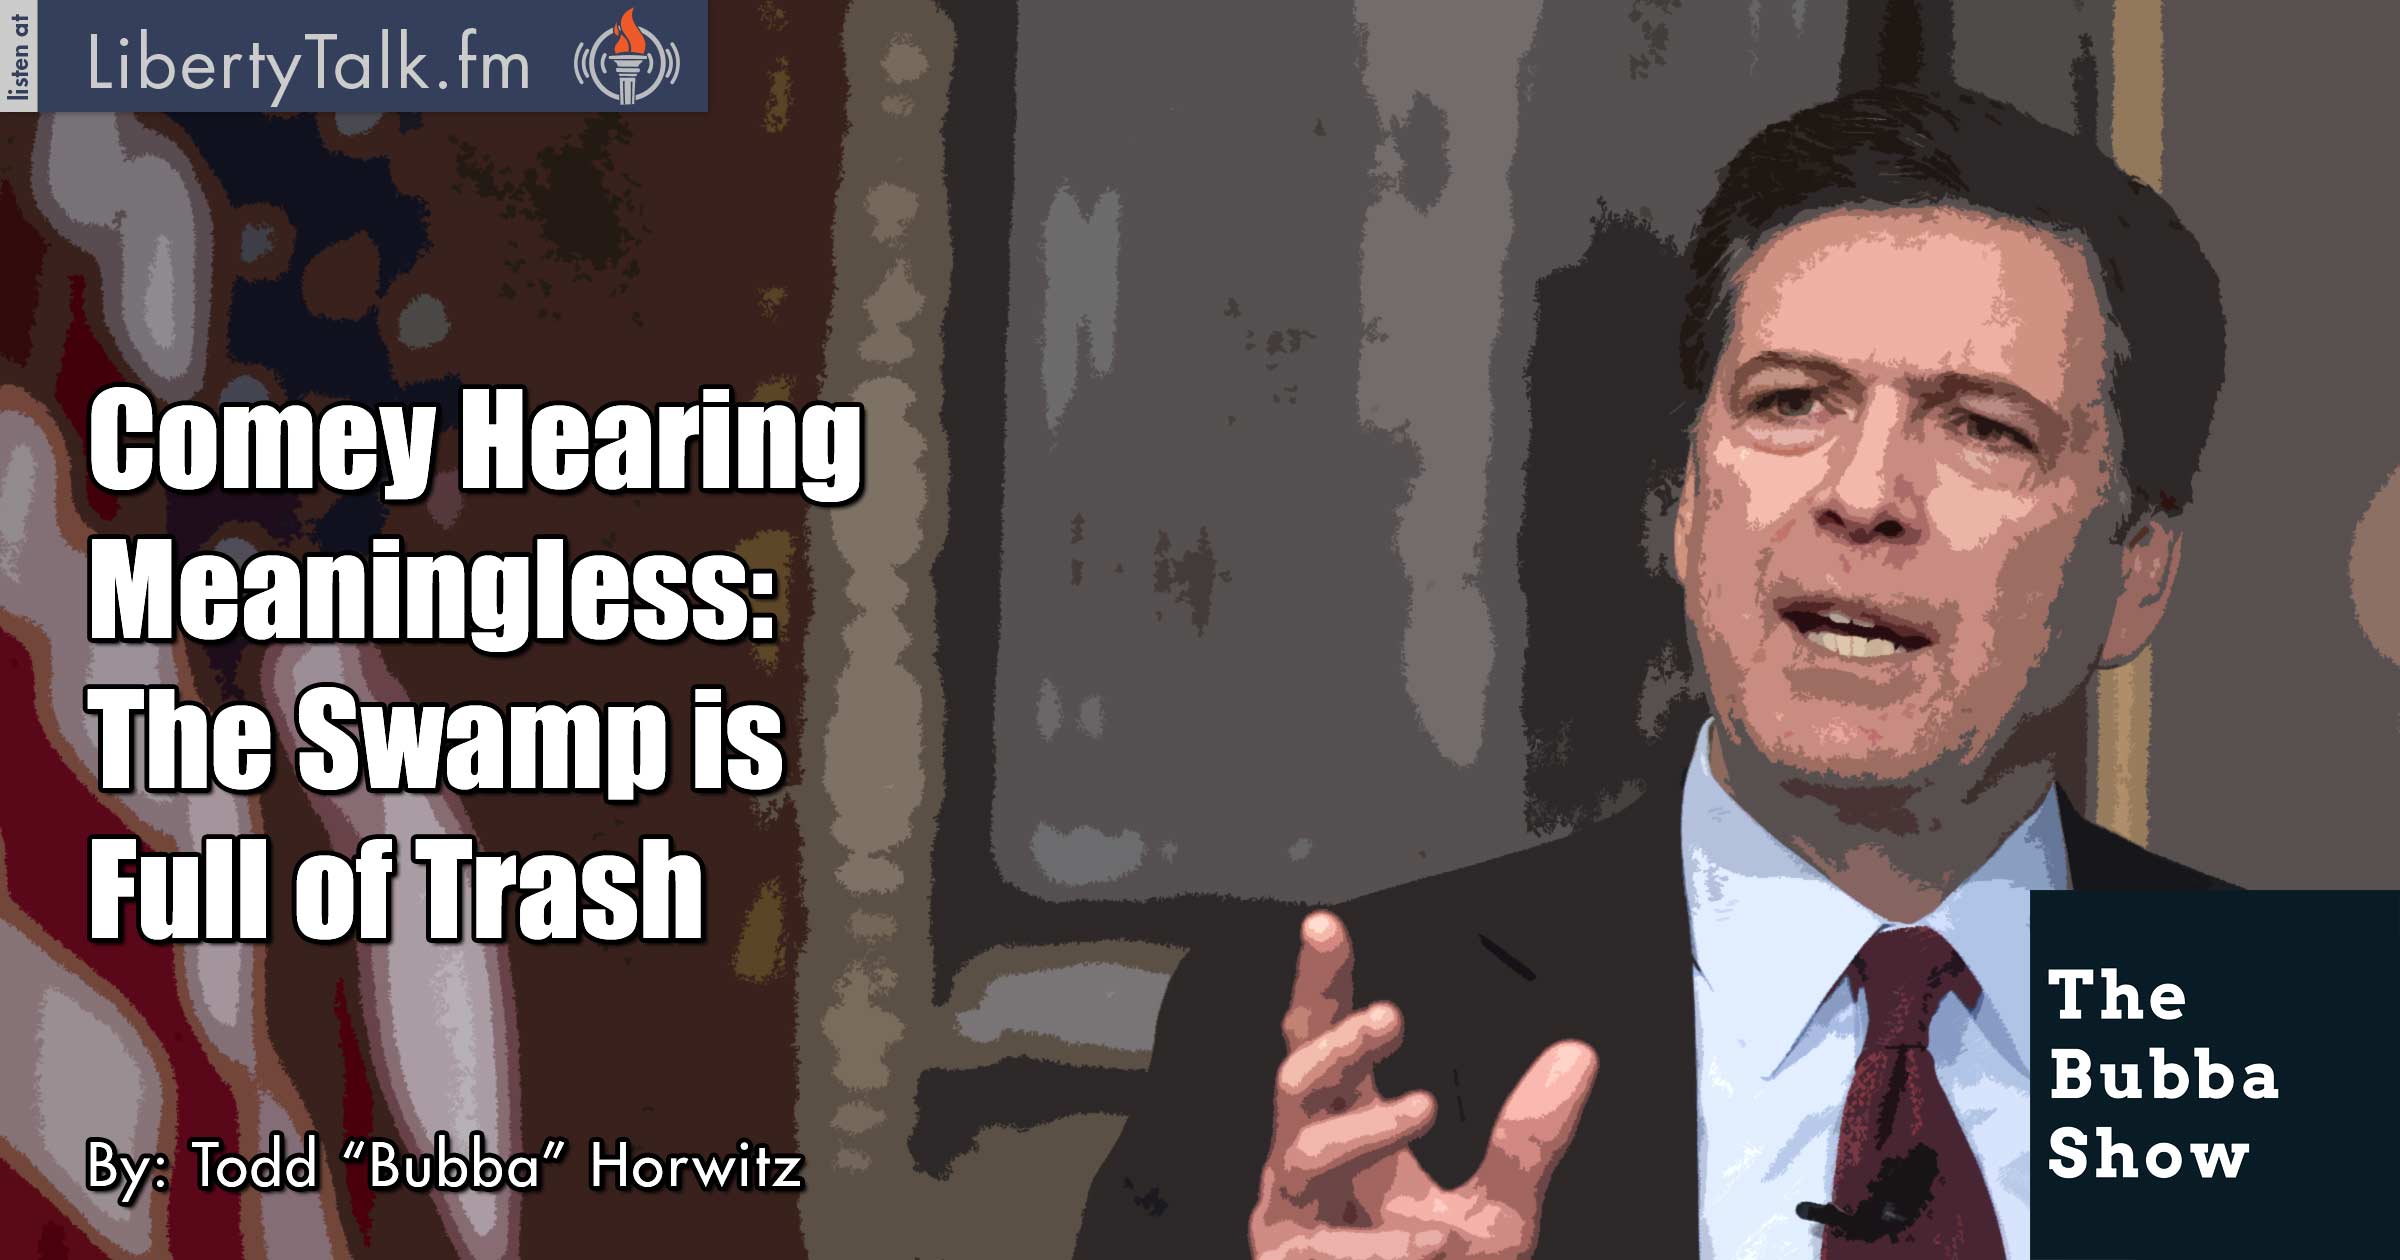 Comey Hearing Meaningless: The Swamp is Full of Trash - The Bubba Show